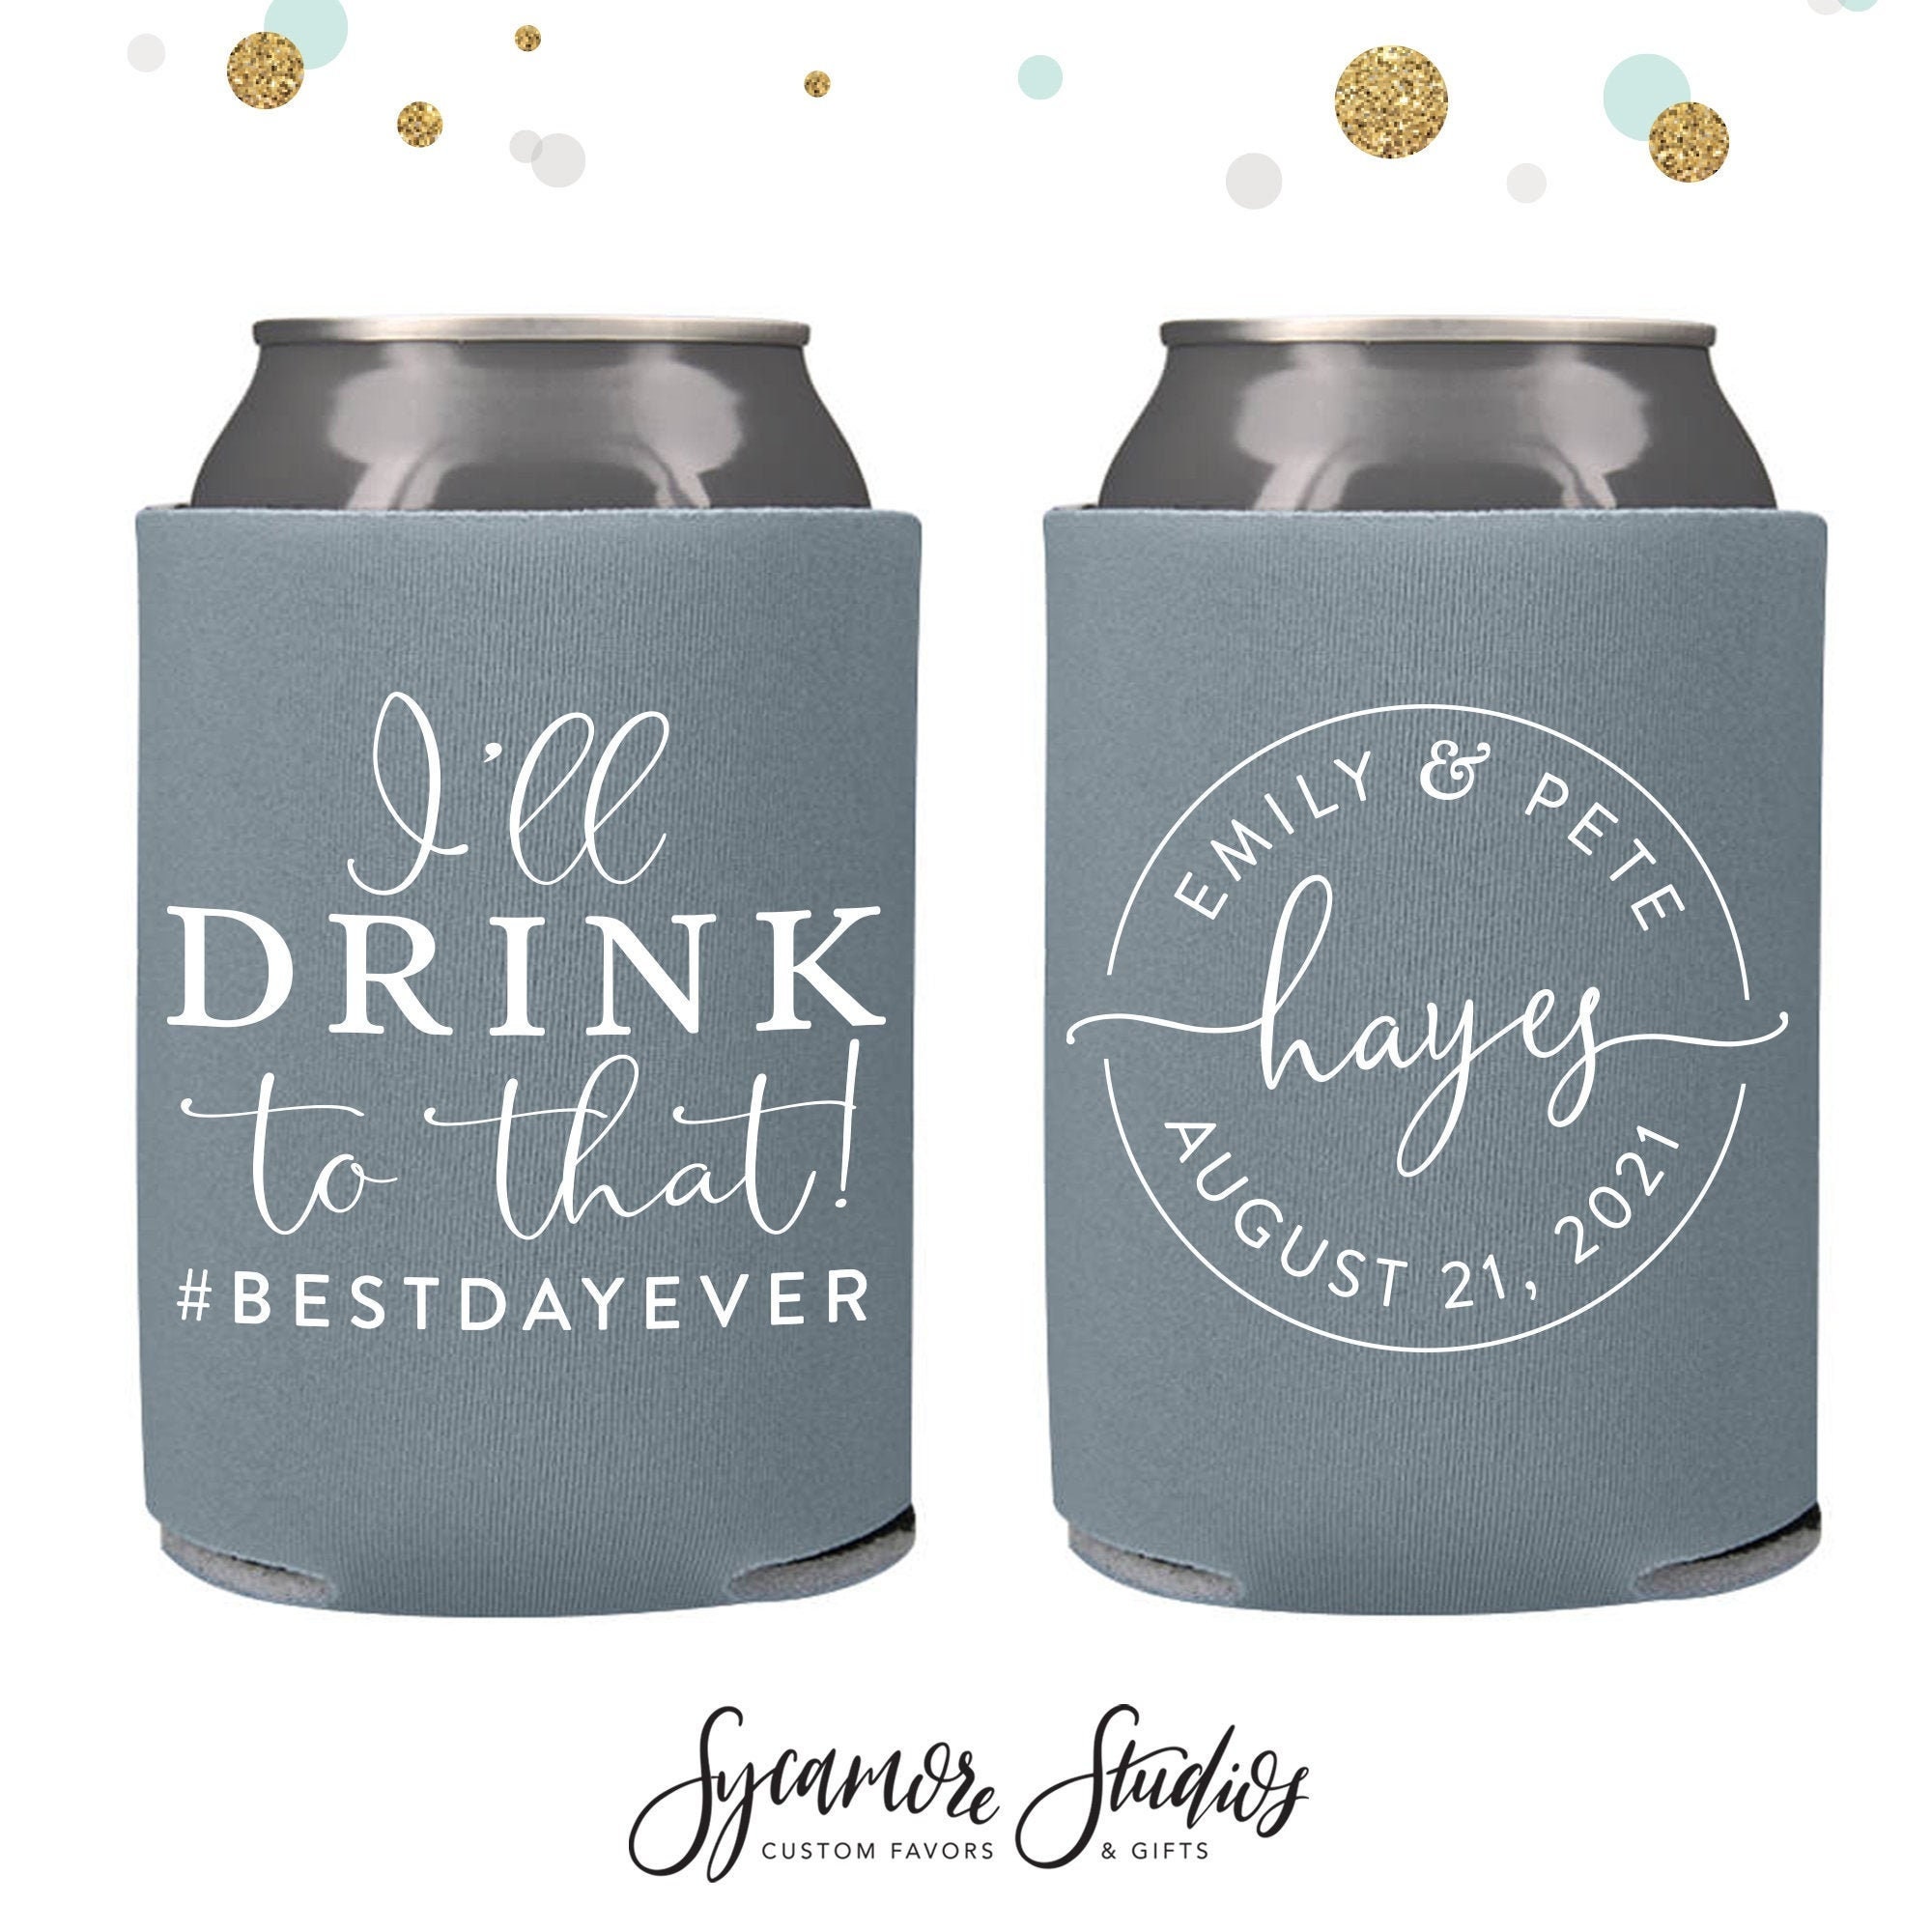 Silver Stainless Steel Insulated Beverage Holder~ One Fancy Koozie